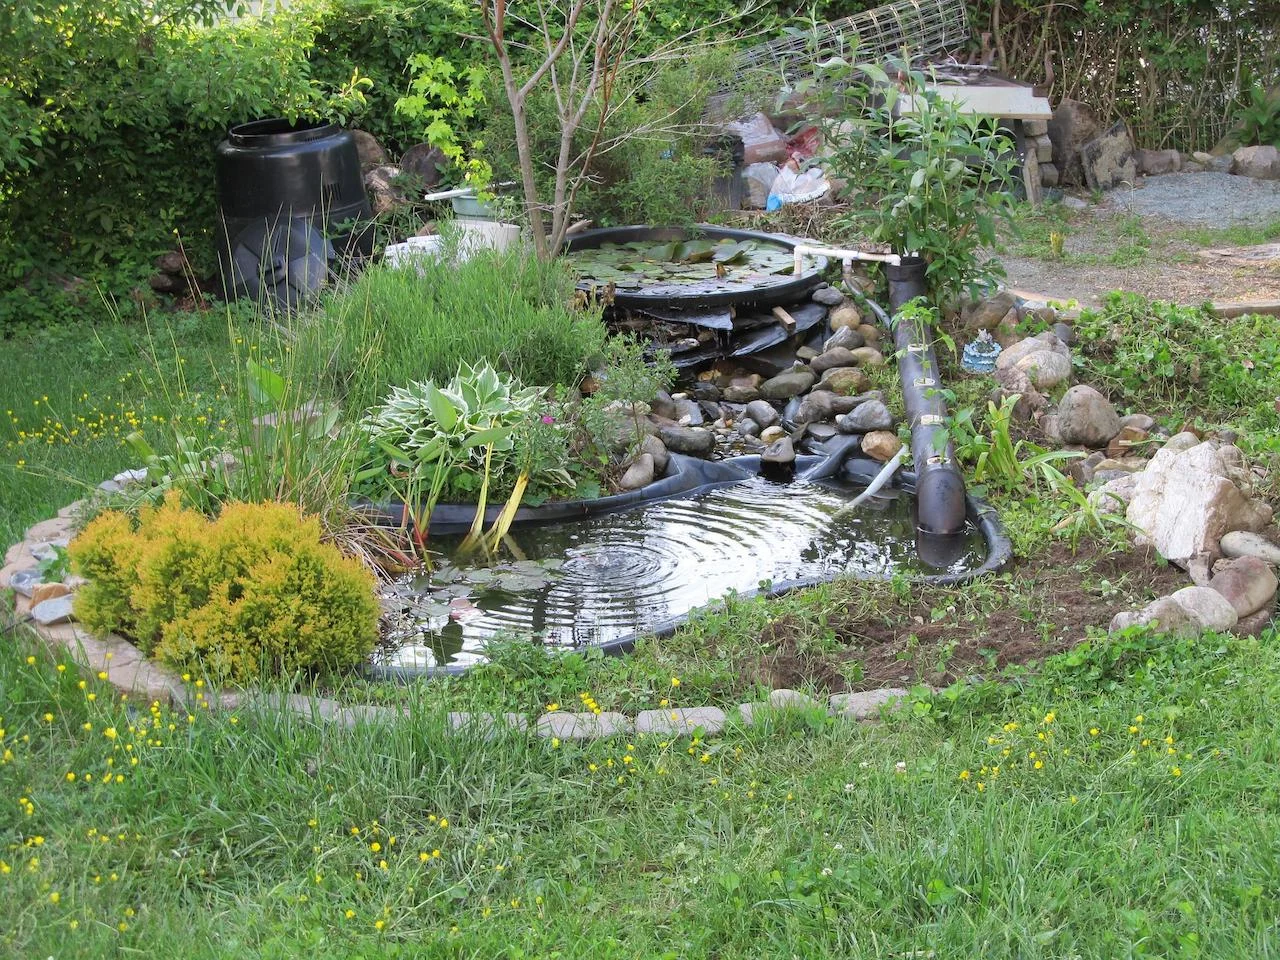 The dos and don’ts of creating a bustling pond for wildlife